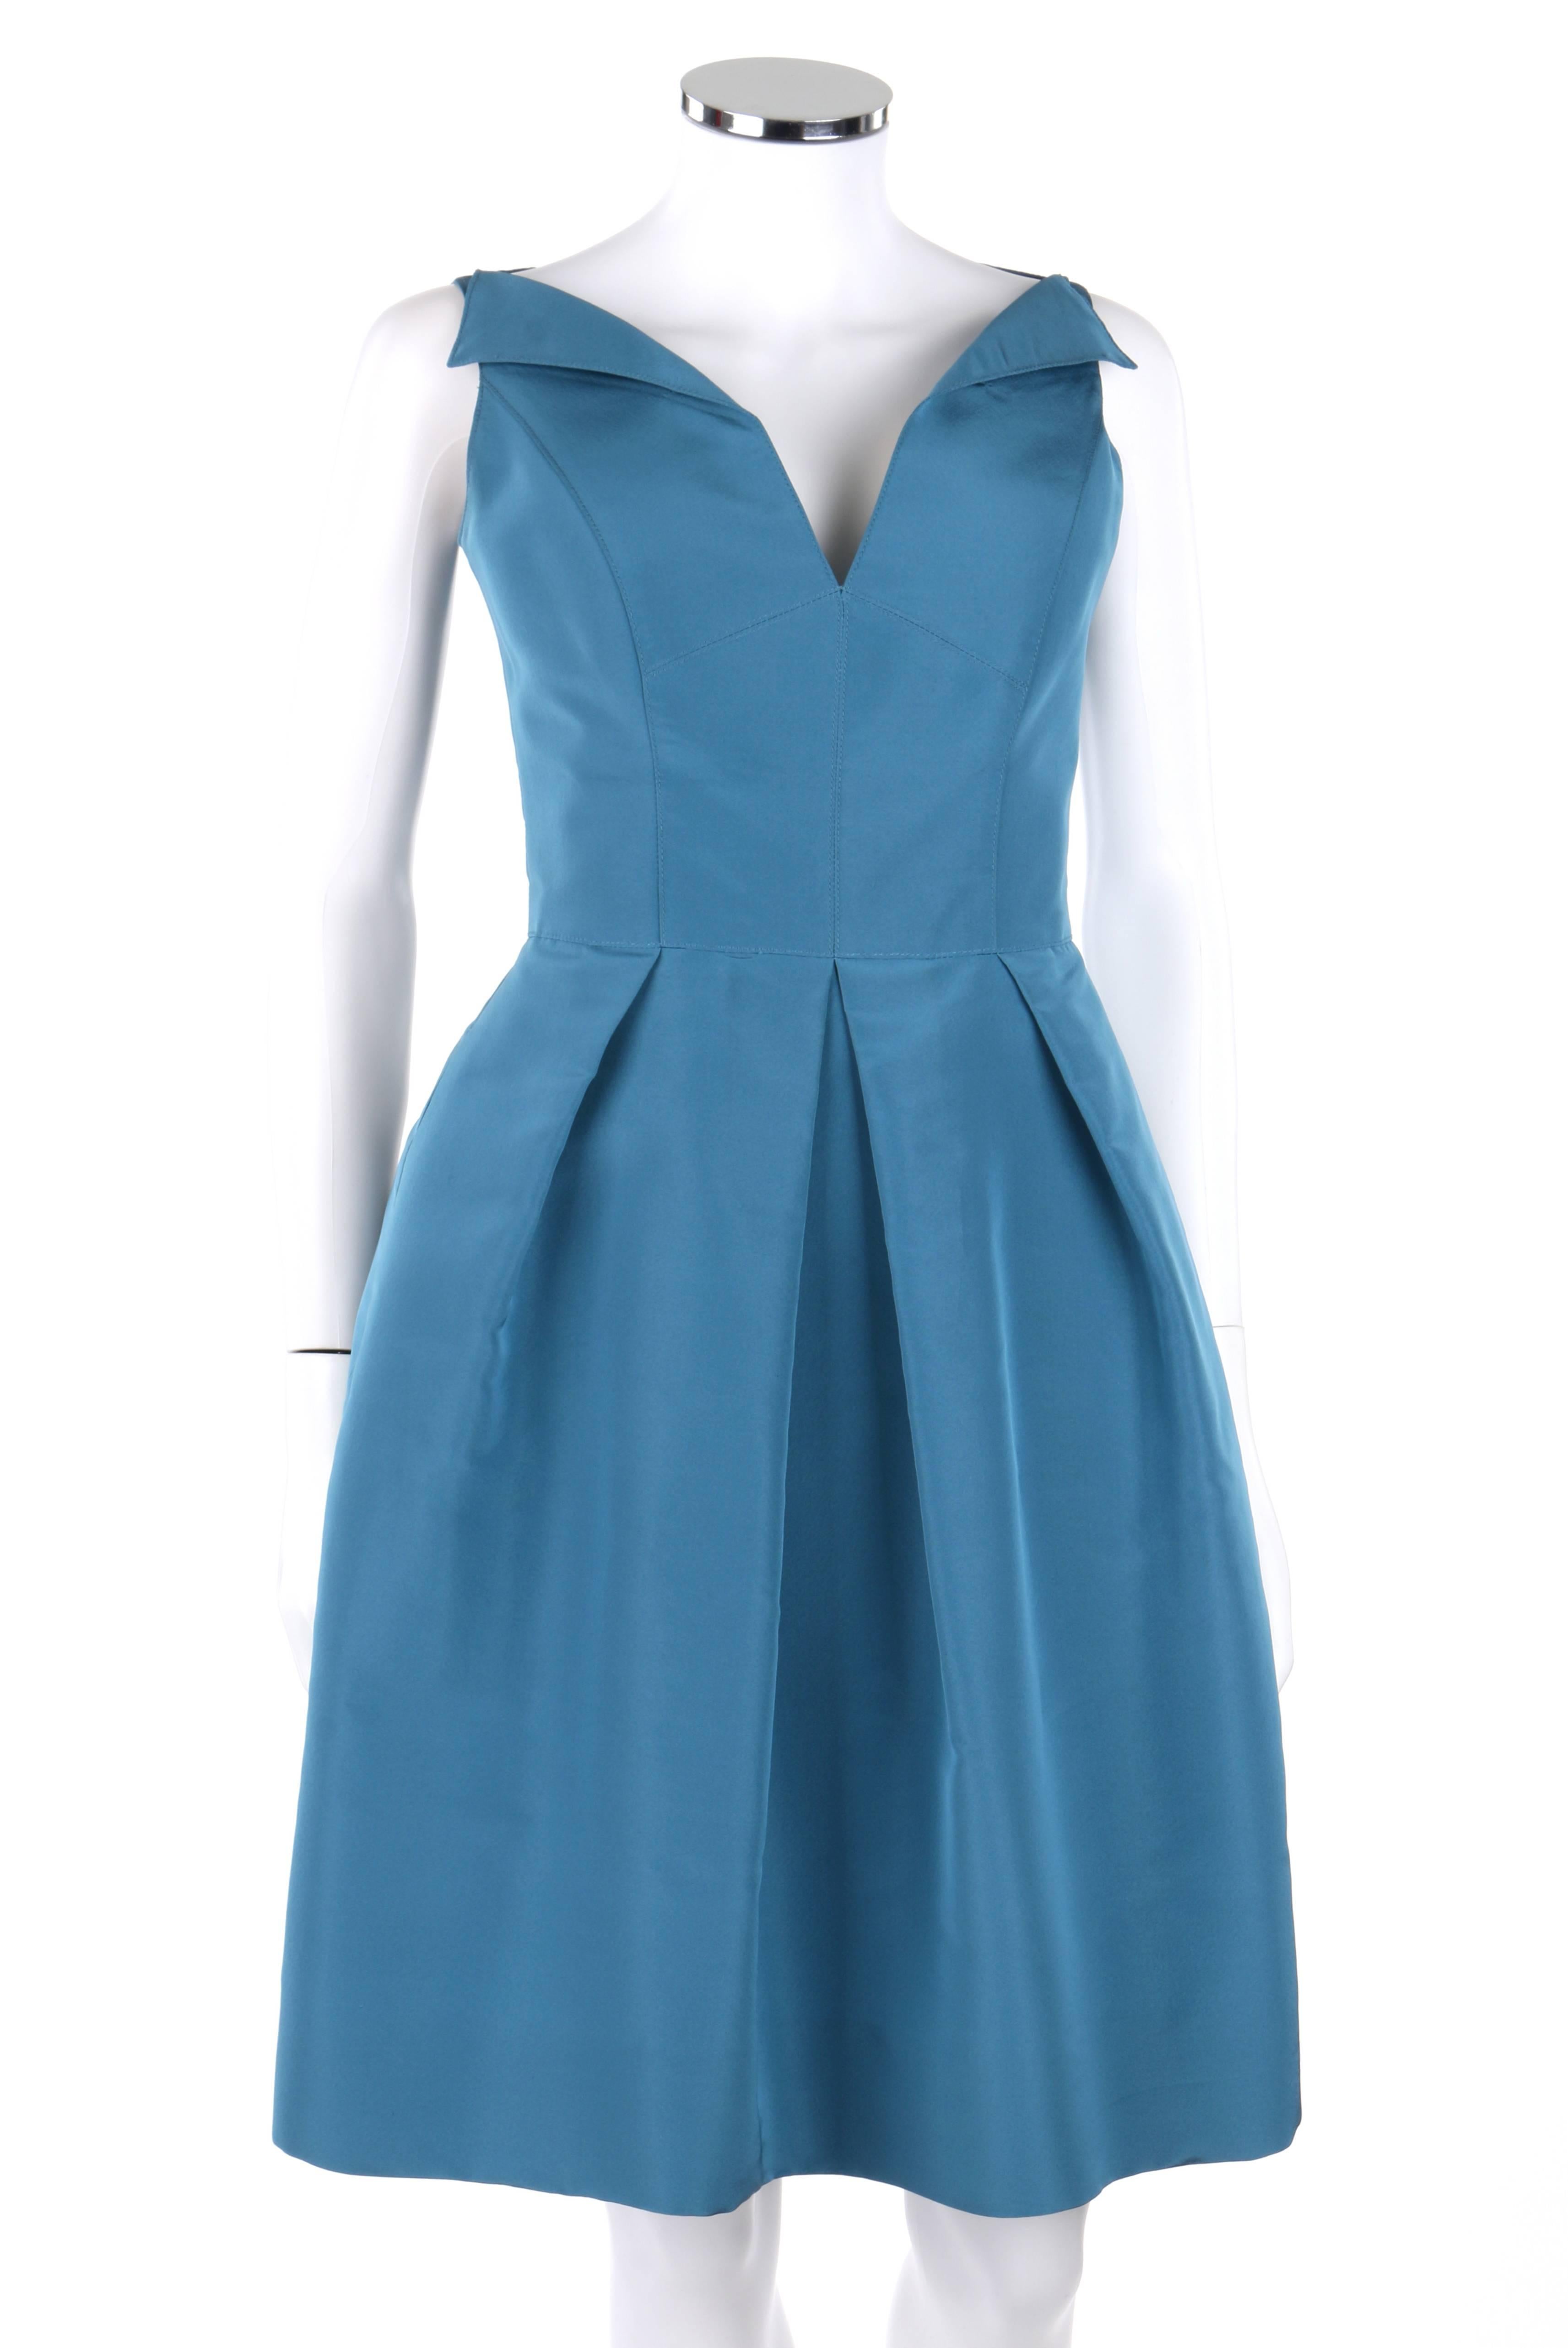 Oscar de la Renta Resort 2008 teal 100% silk sleeveless cocktail dress. Bateau v-neckline with lapels. Princess seams. Knife pleated skirt. Two front inseam pockets. Center back invisible zipper with hook and eye closure at top. Fully lined.